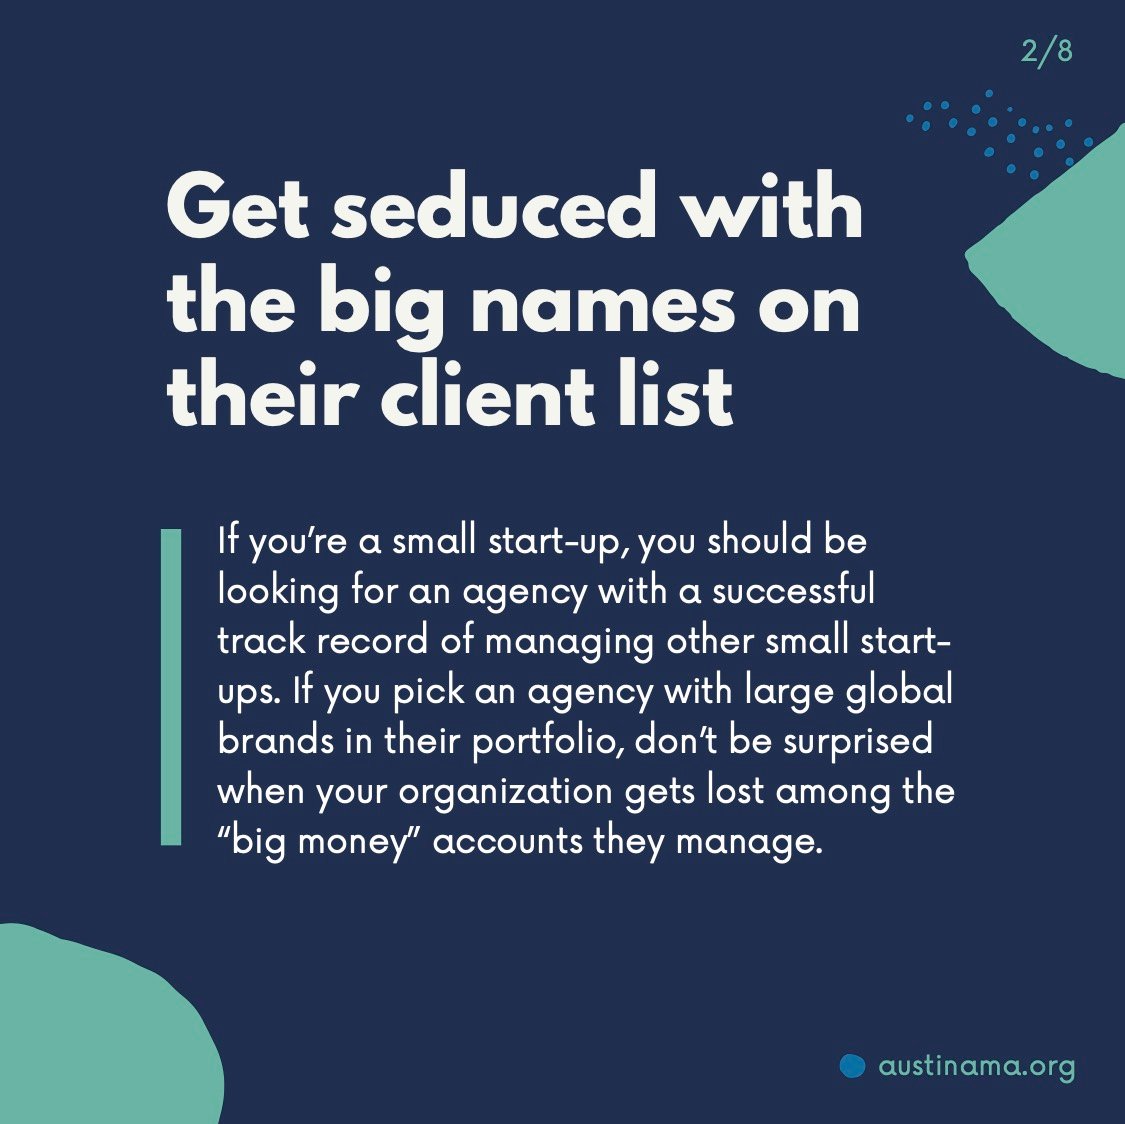 What NOT to do when selecting a new agency - 2